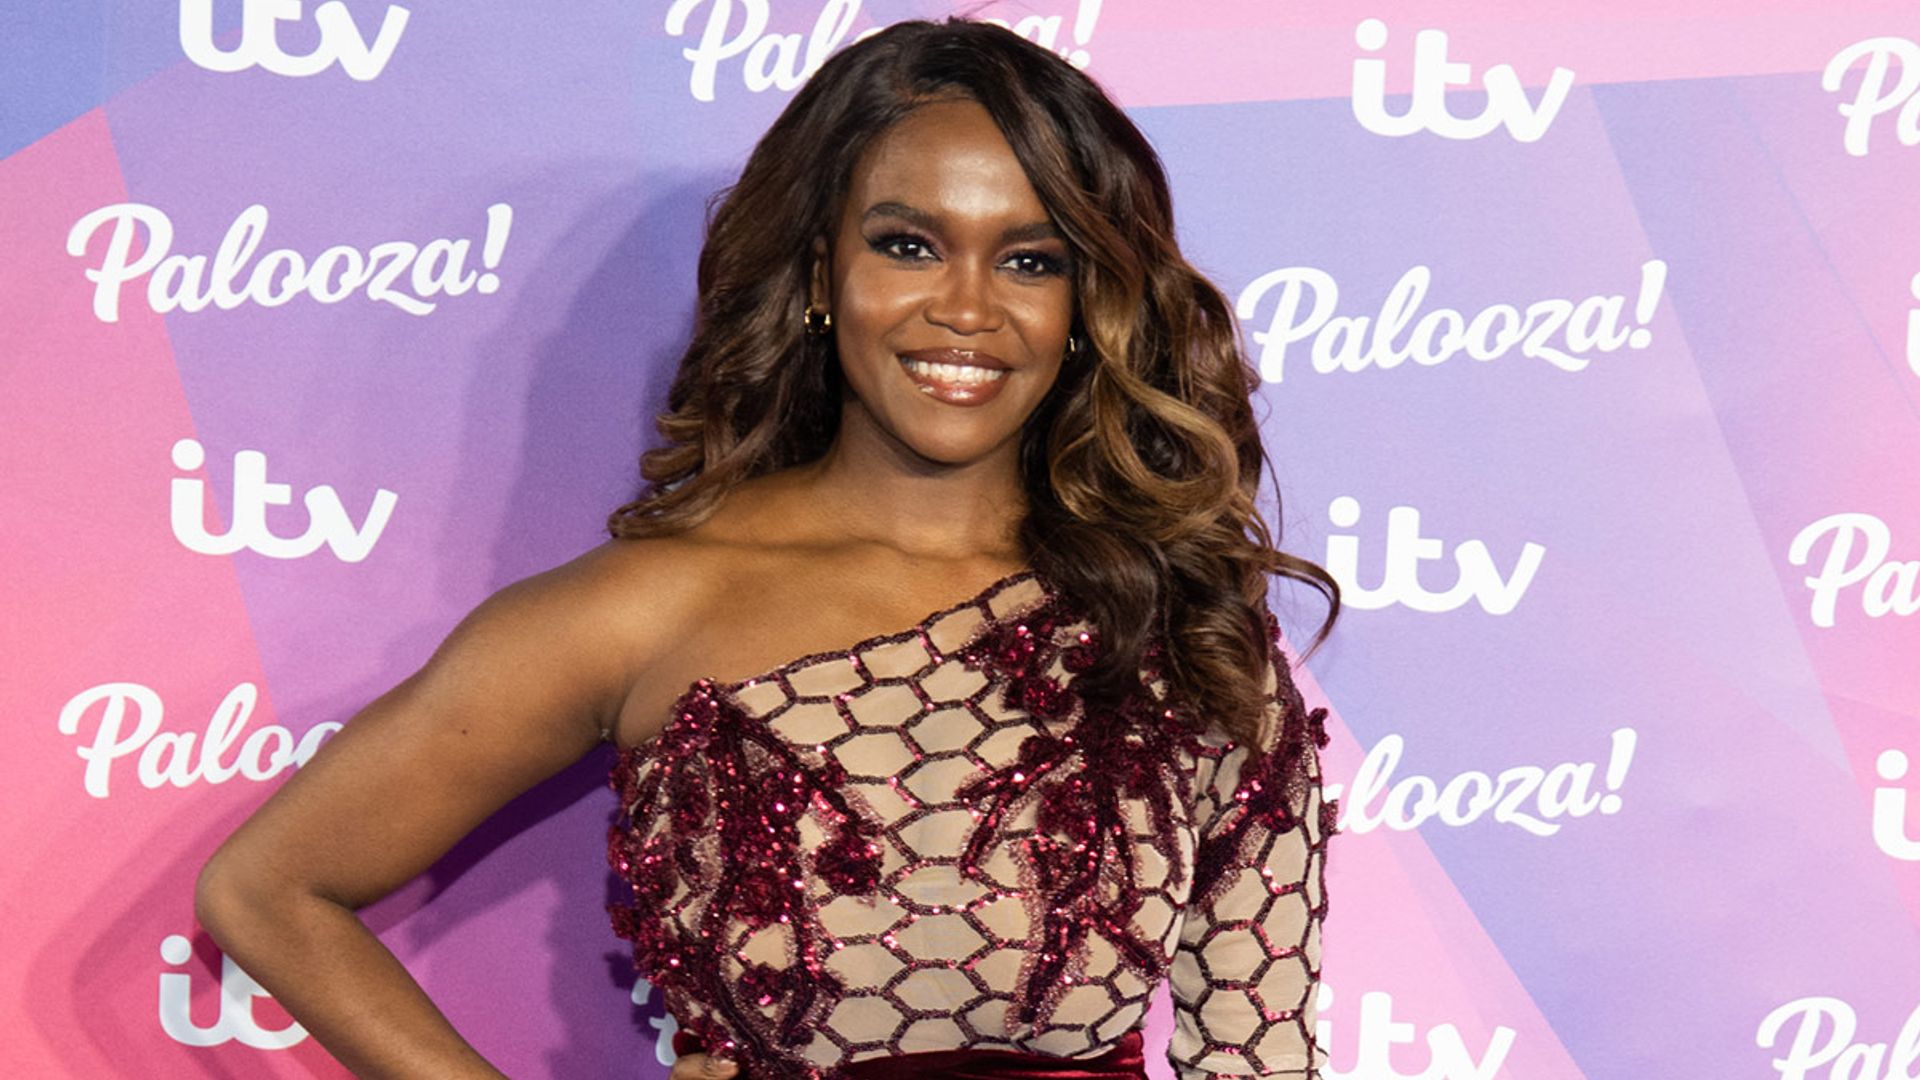 ITV confirms Oti Mabuse will join Dancing on Ice as a judge